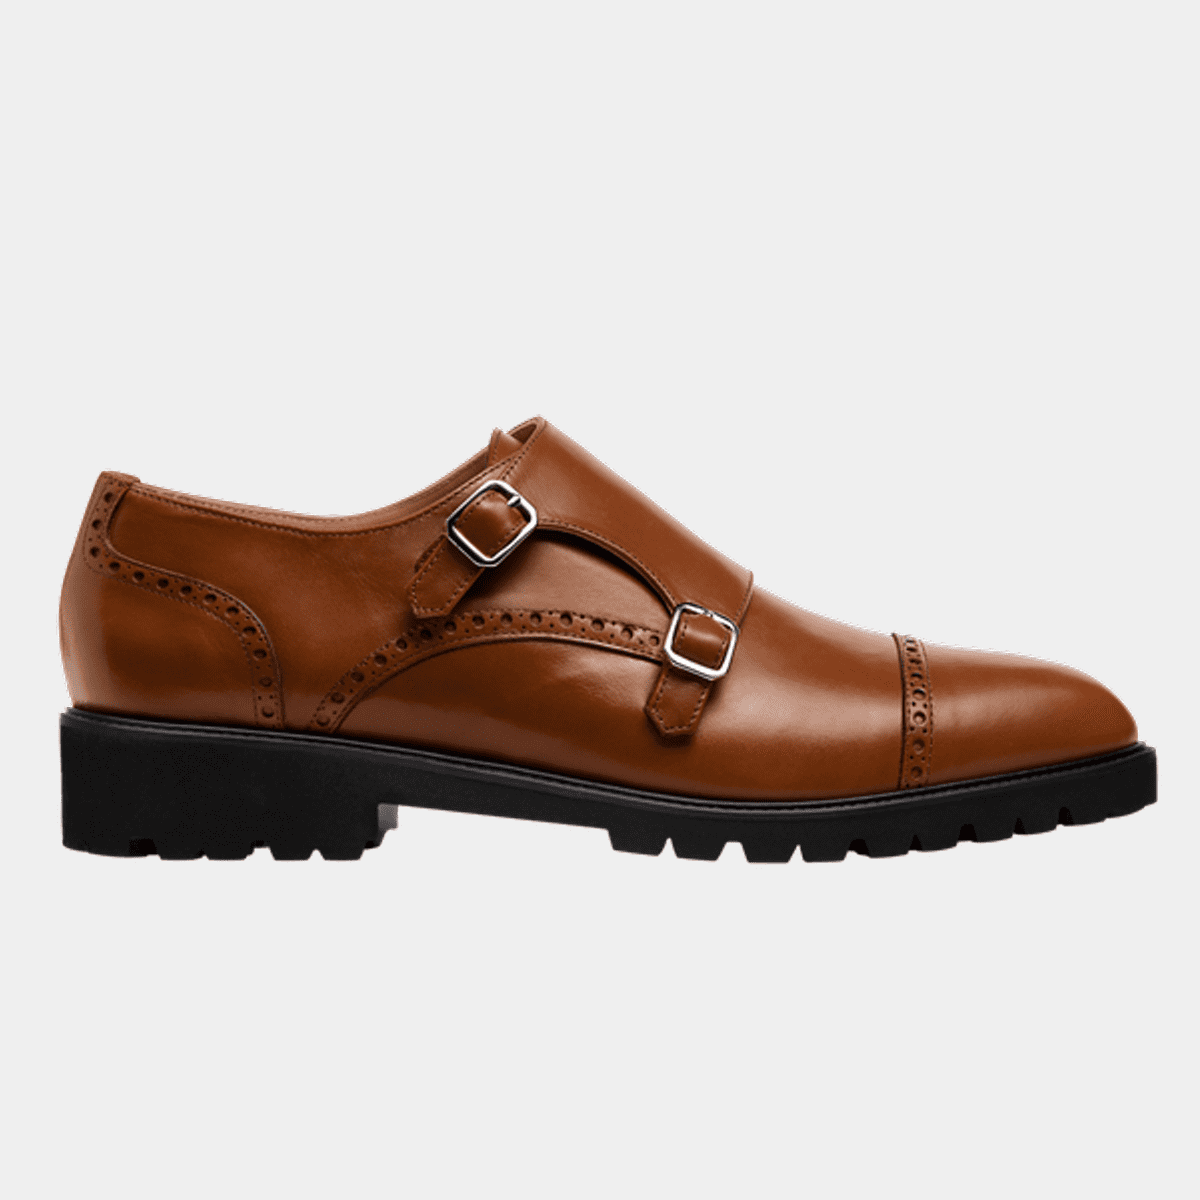 Double Monk brogues - brown italian calf leather | Hockerty